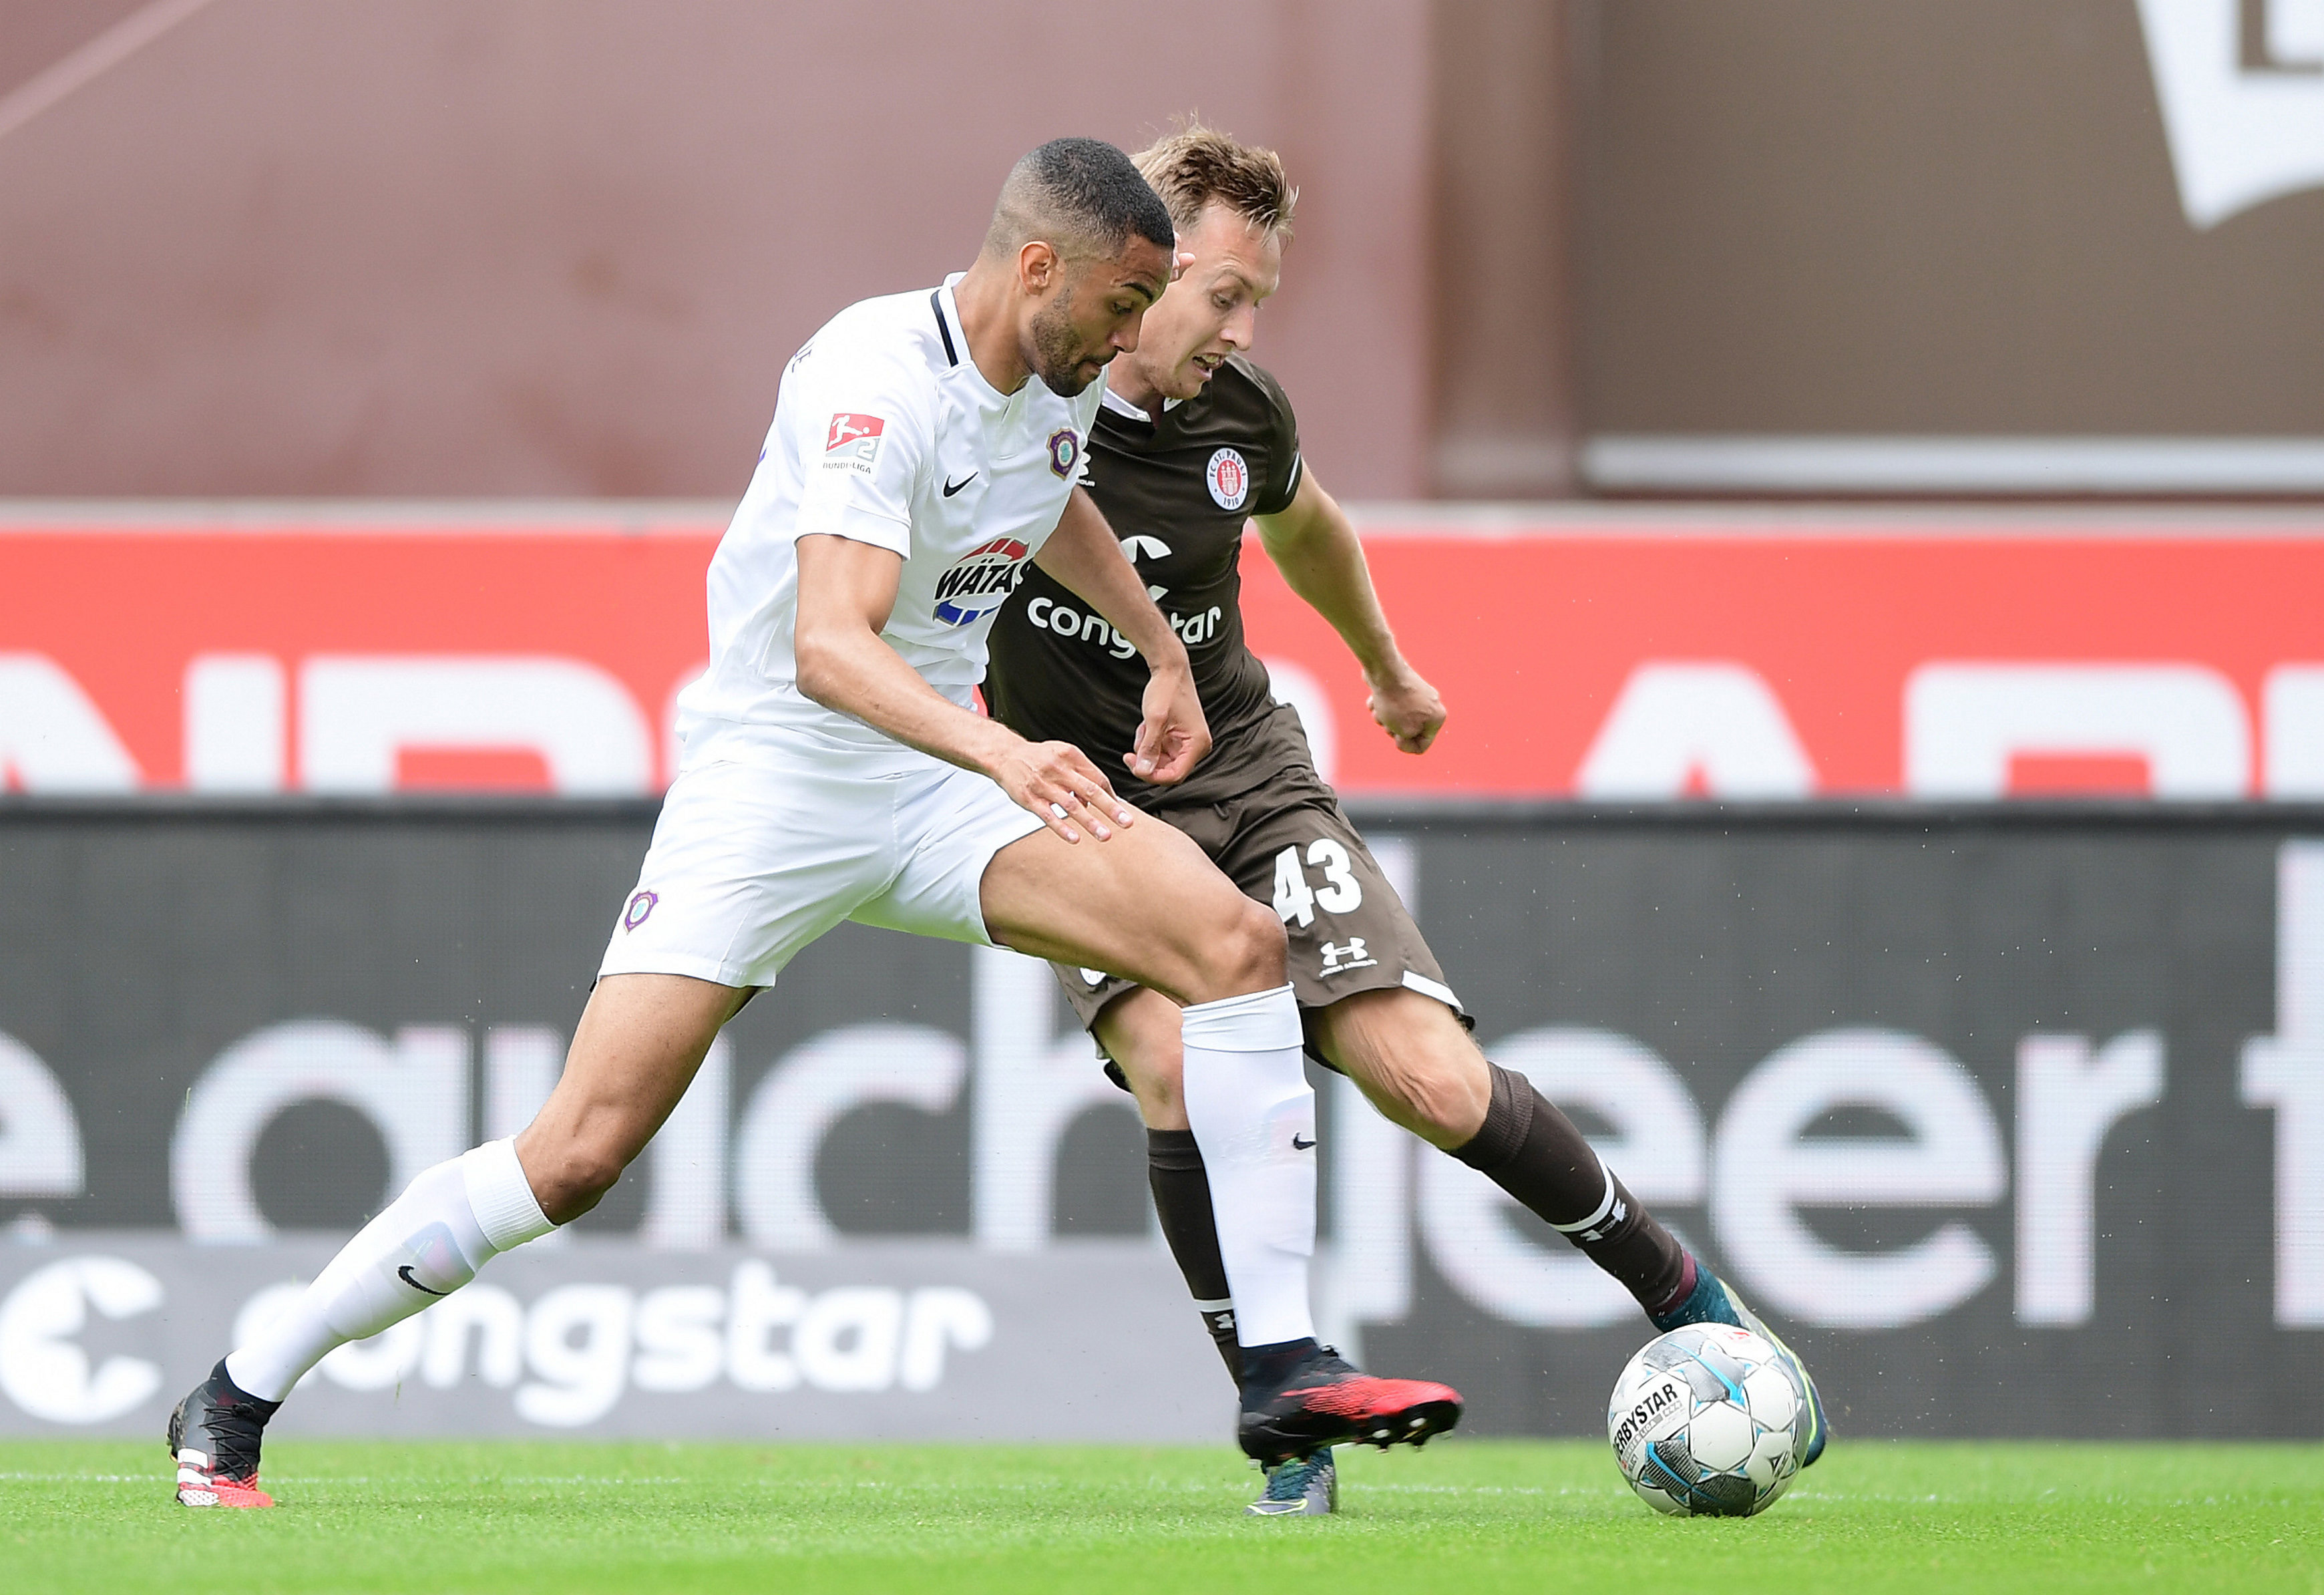 In the 2-1 home defeat of Erzgebirge Aue, Sebastian Ohlsson, seen here under challenge from Malcolm Cacutalua, made the opening goal for Dimitrios Diamantakos. It was his only assist last season.